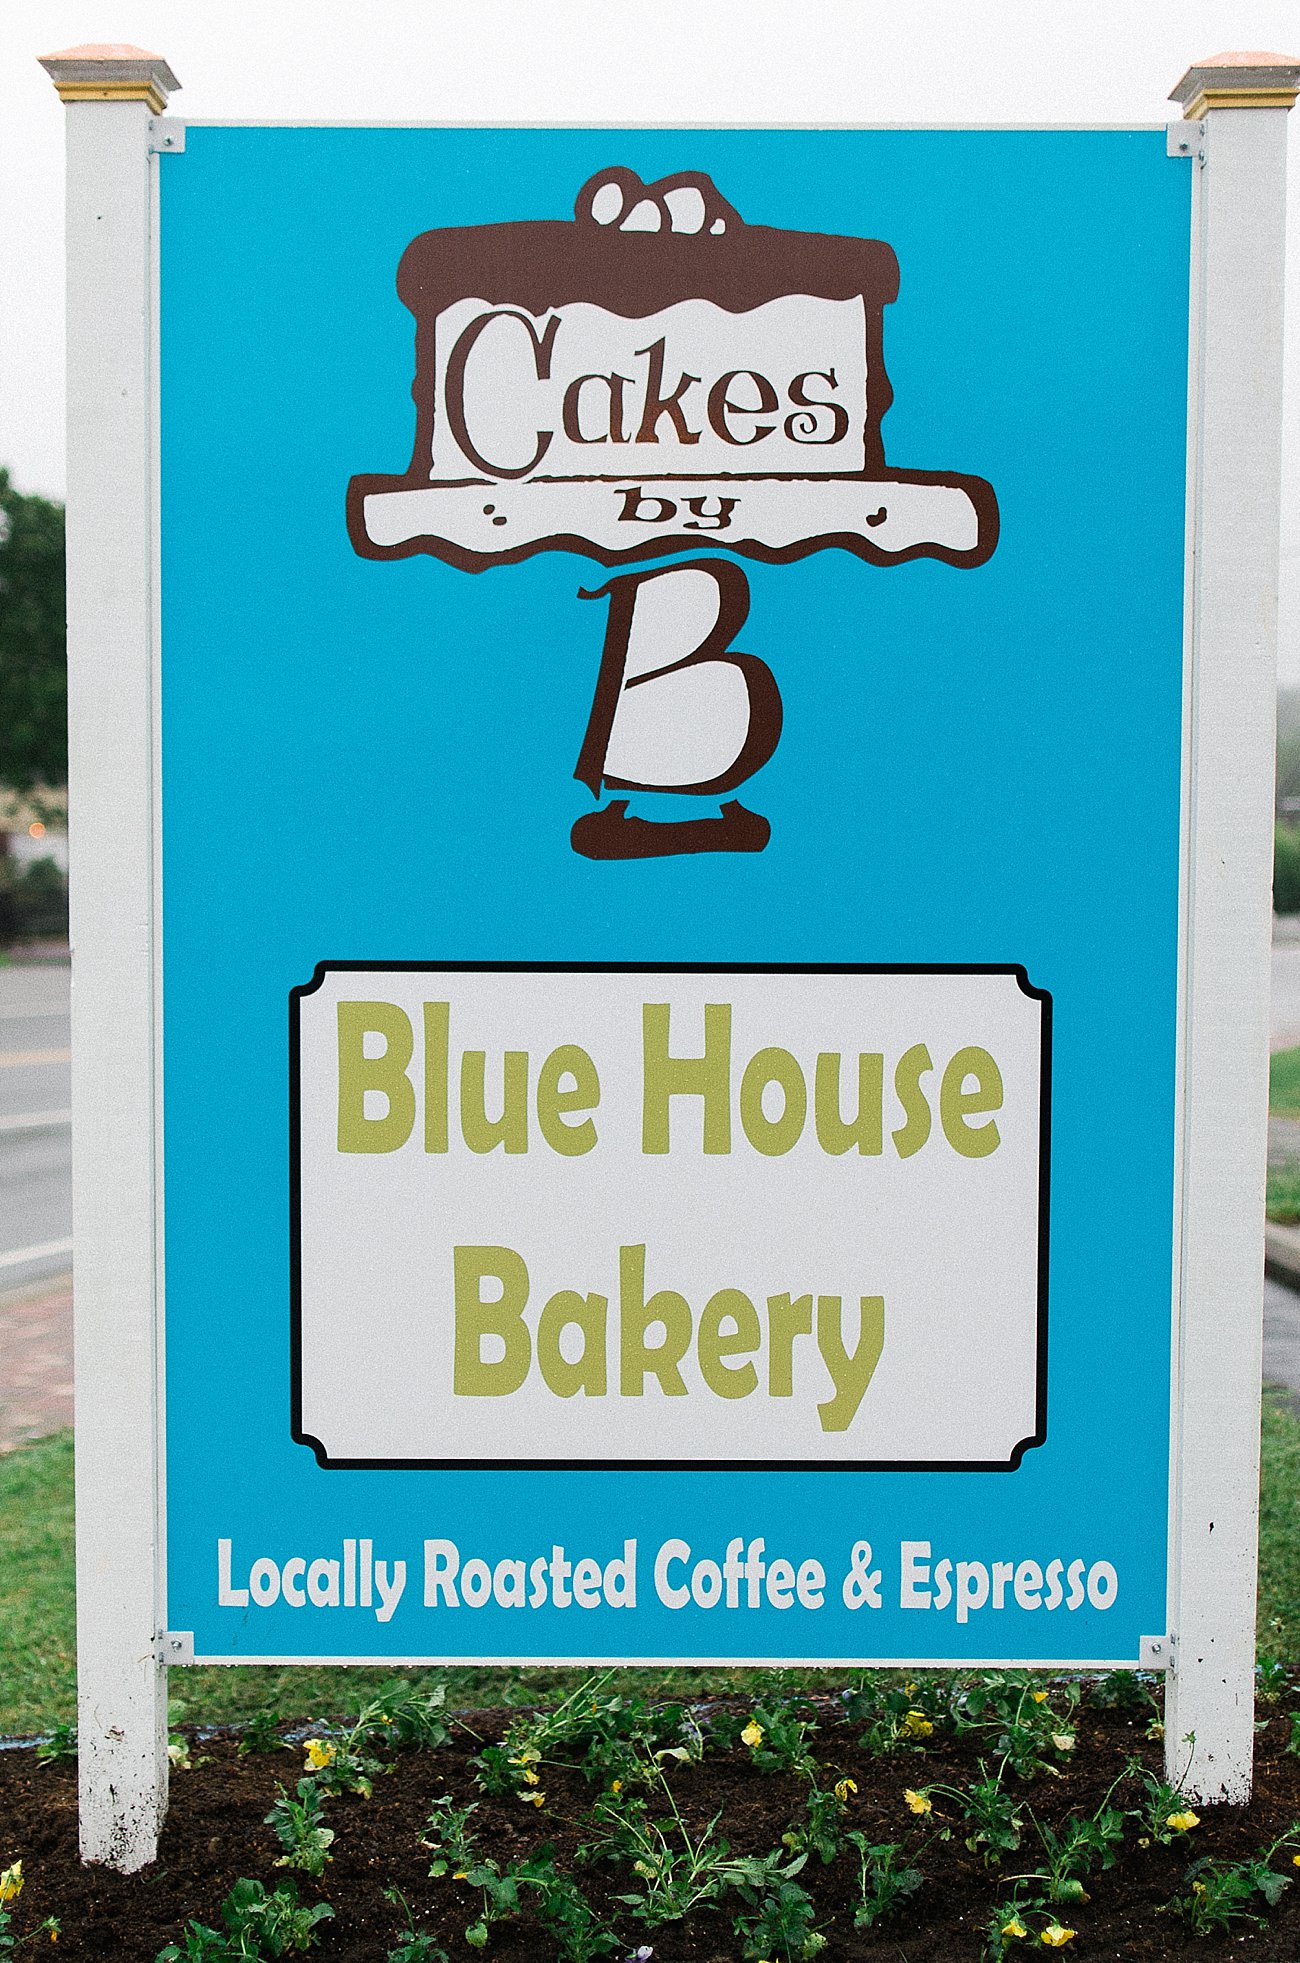 Cakes by By's Blue House Bakery and Coffee Shop in Jamestown, North Carolina (2)